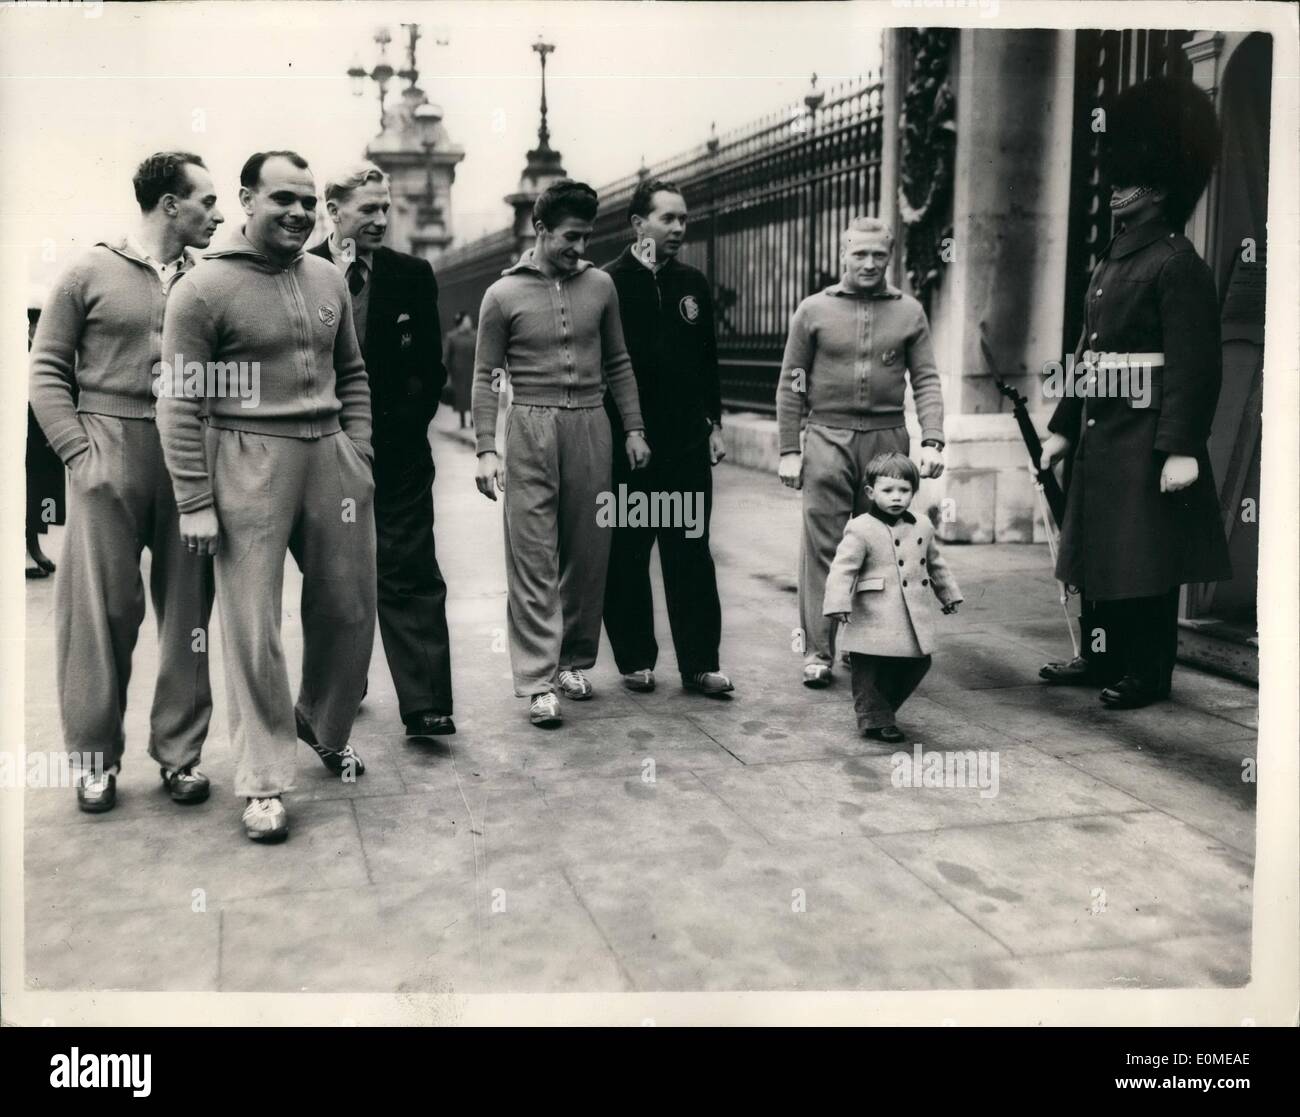 Nov. 11, 1954 - German Footballers out walking in London Strolling past the Palace: Members of the German Football Team that meets England at Wembley on Wednesday - and who arrived in London only this morning - were to be seen out walking and running in the Park - Limbering up etc. Photo Shows Members of the team - wearing their track suits - walking past Buckingham Palace soon after their arrival in London this morning. They are accompanied by 2 1/2 year old Jonathan Gaynor of Edwards Square. Stock Photo